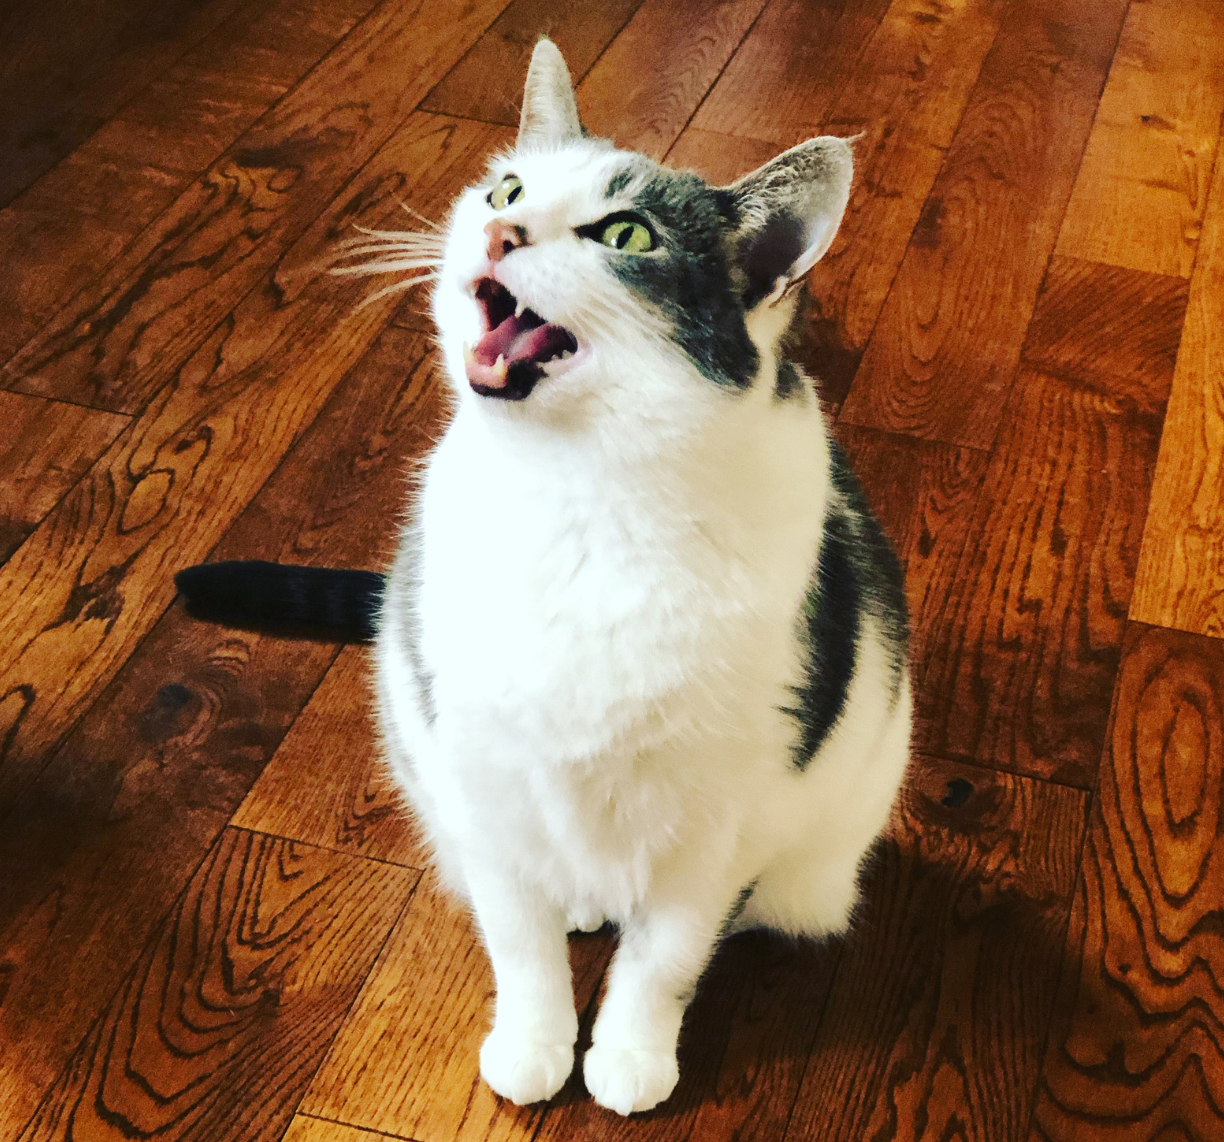 Why Is My Cat Meowing a Lot Suddenly? - Catster